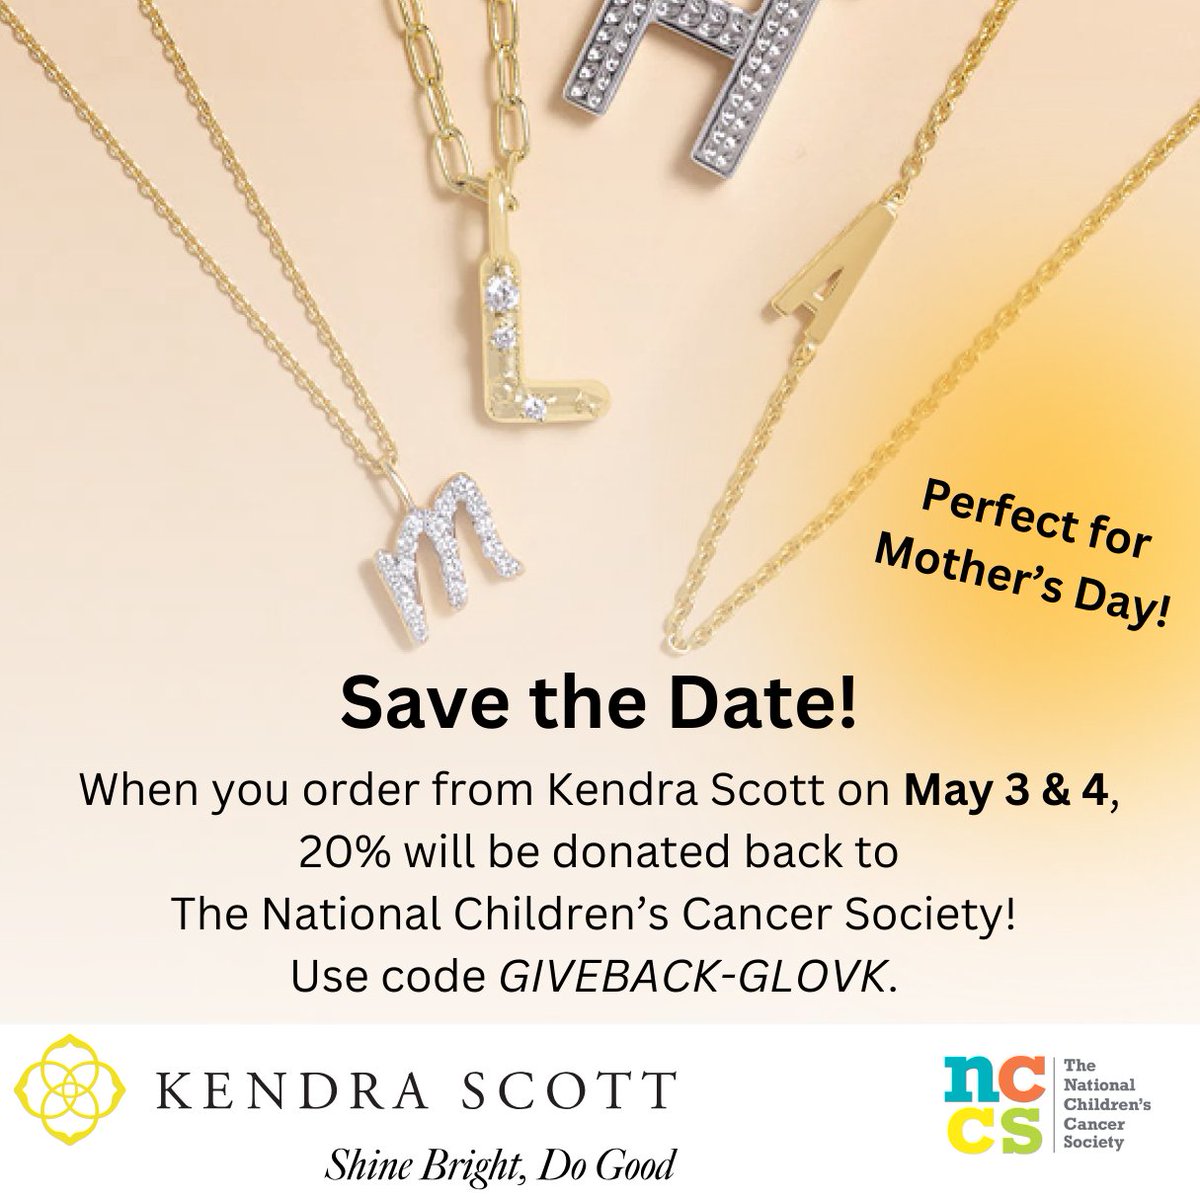 When you shop from kendrascott.com on May 3rd and 4th, 20% of the proceeds will be gifted back to the NCCS! This is the perfect opportunity to shop for Mother's Day, graduations, or just because!  #ShopForACause #MothersDayGifts #GraduationGifts #CharityEvent #theNCCS